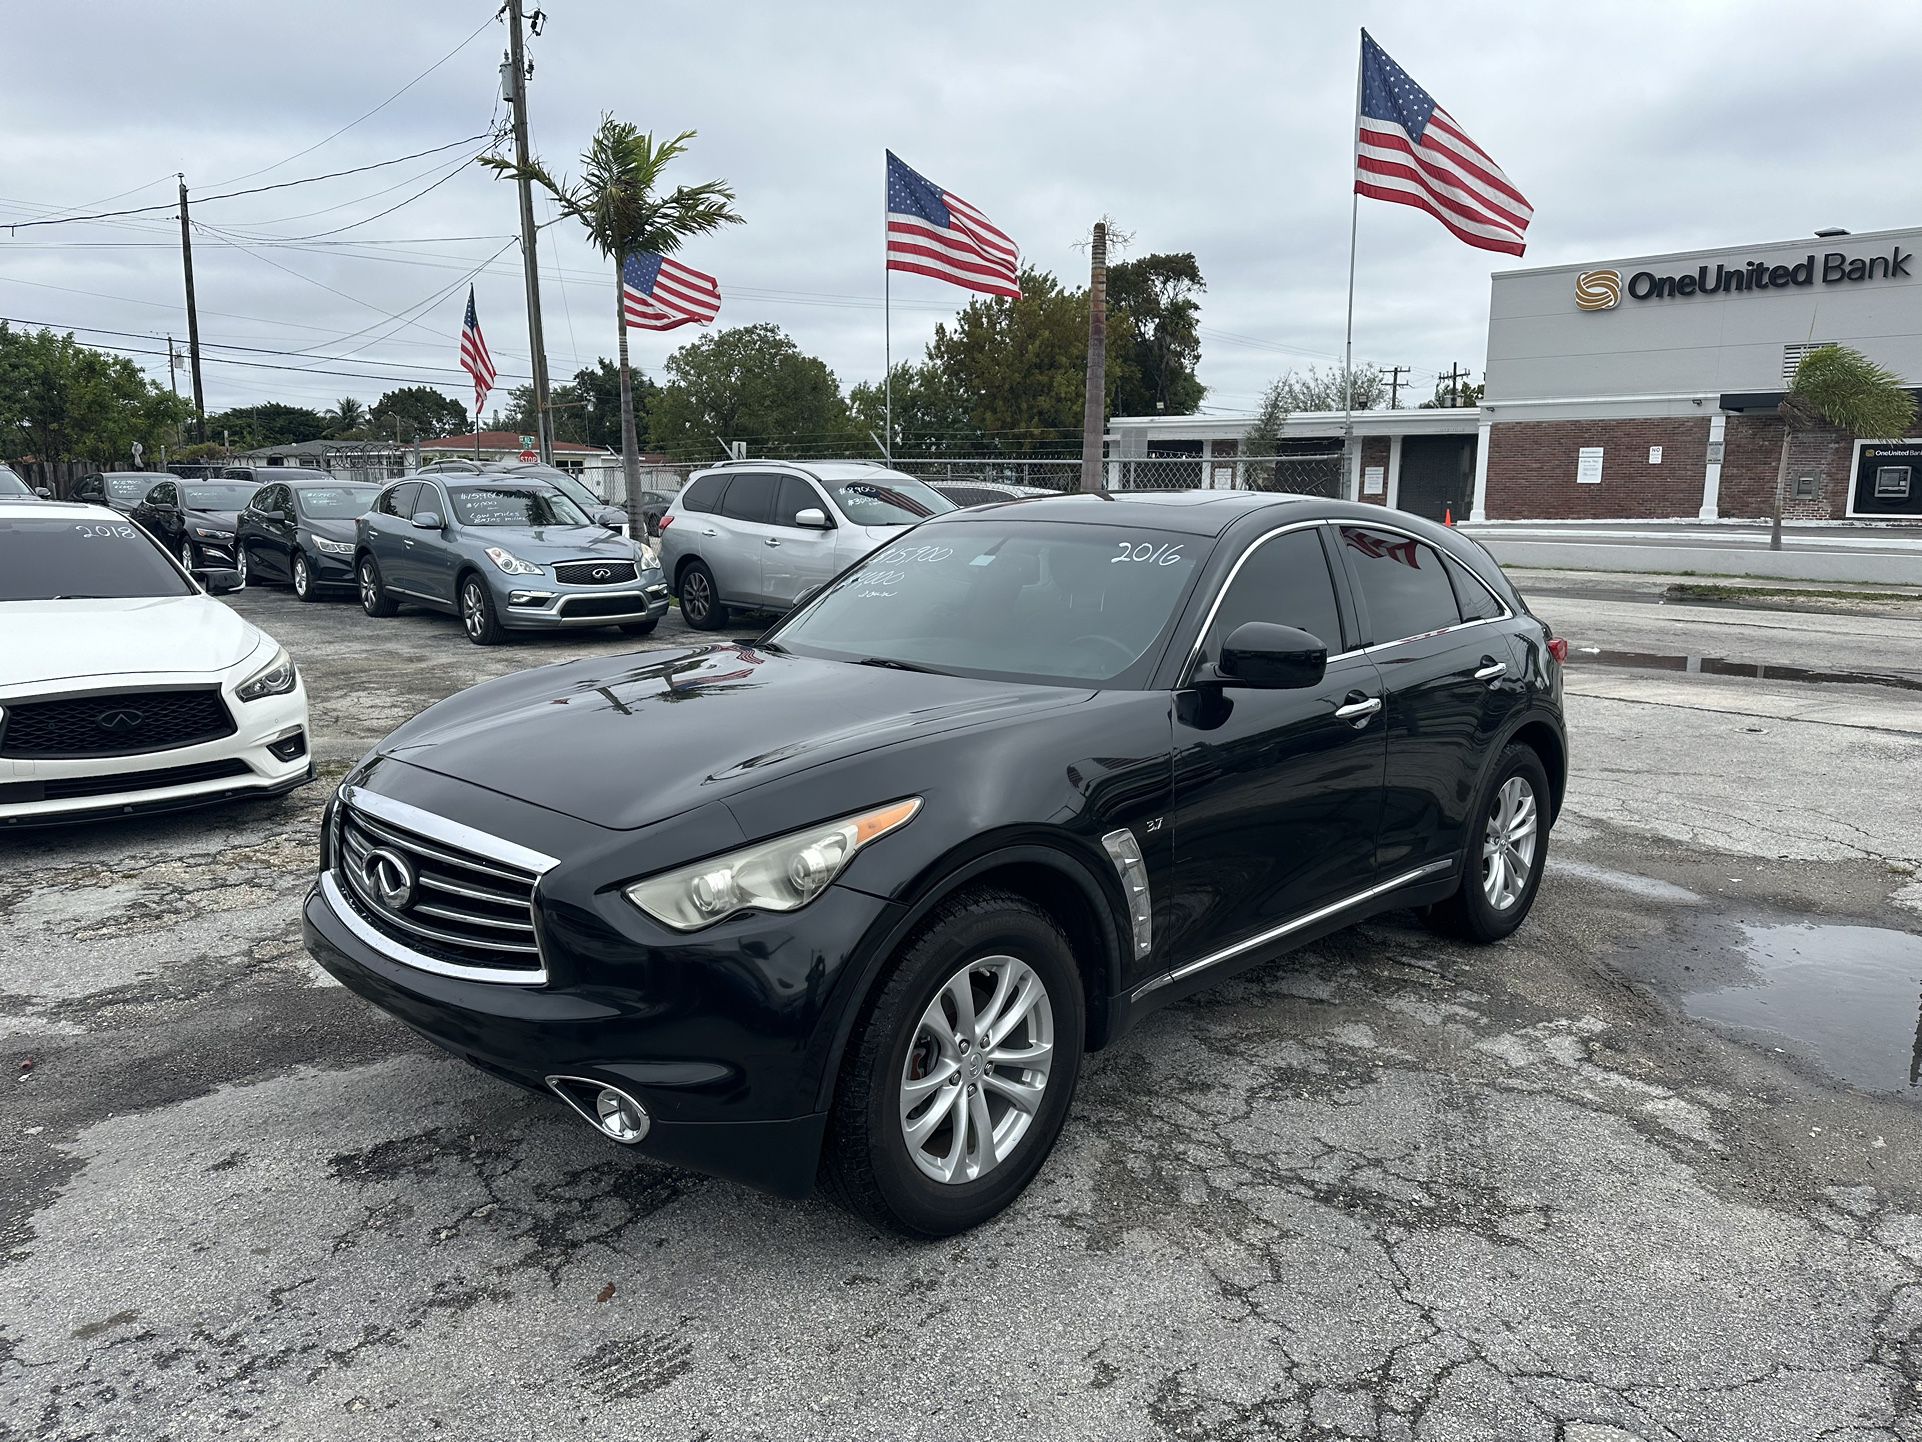 used 2016 INFINITI QX70 - front view 3